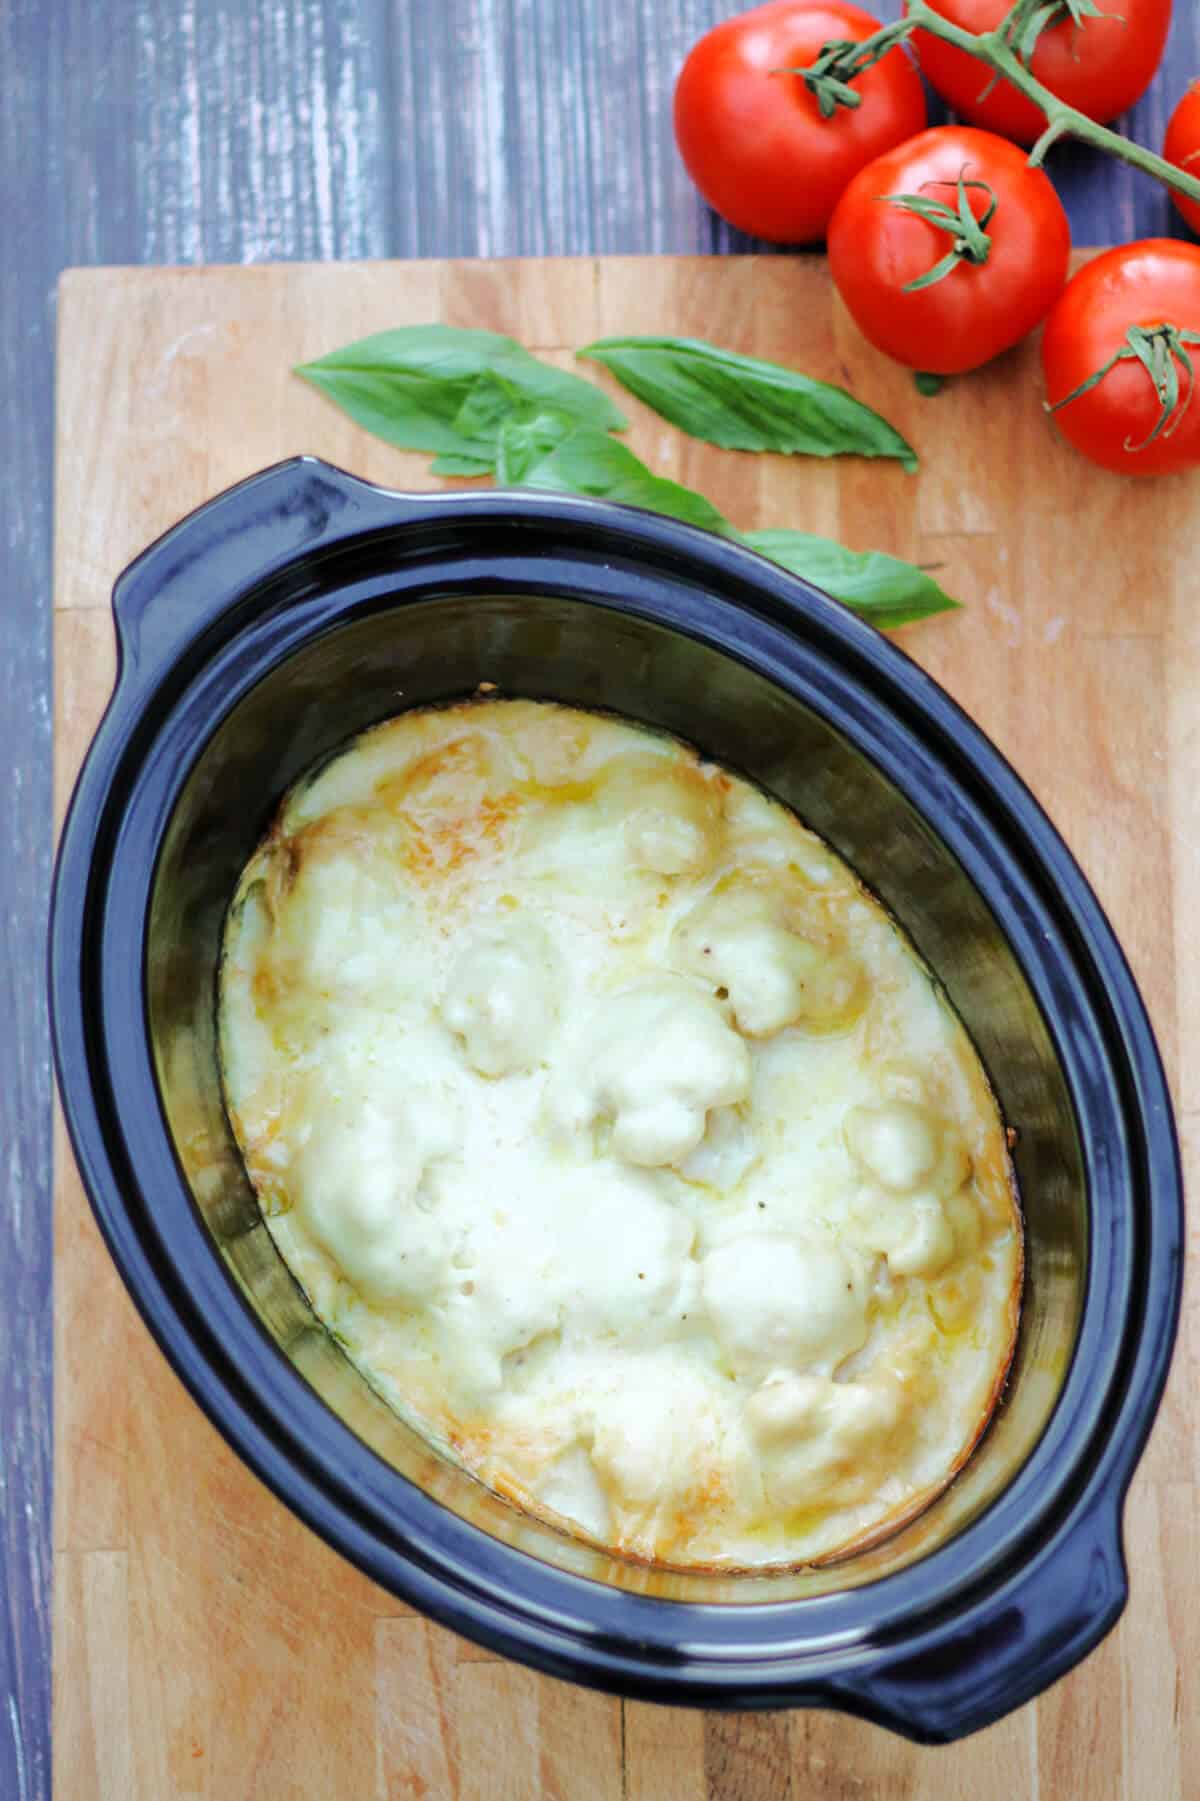 Slow cooker pot filled with cauliflower cheese, tomatoes and basil on side.